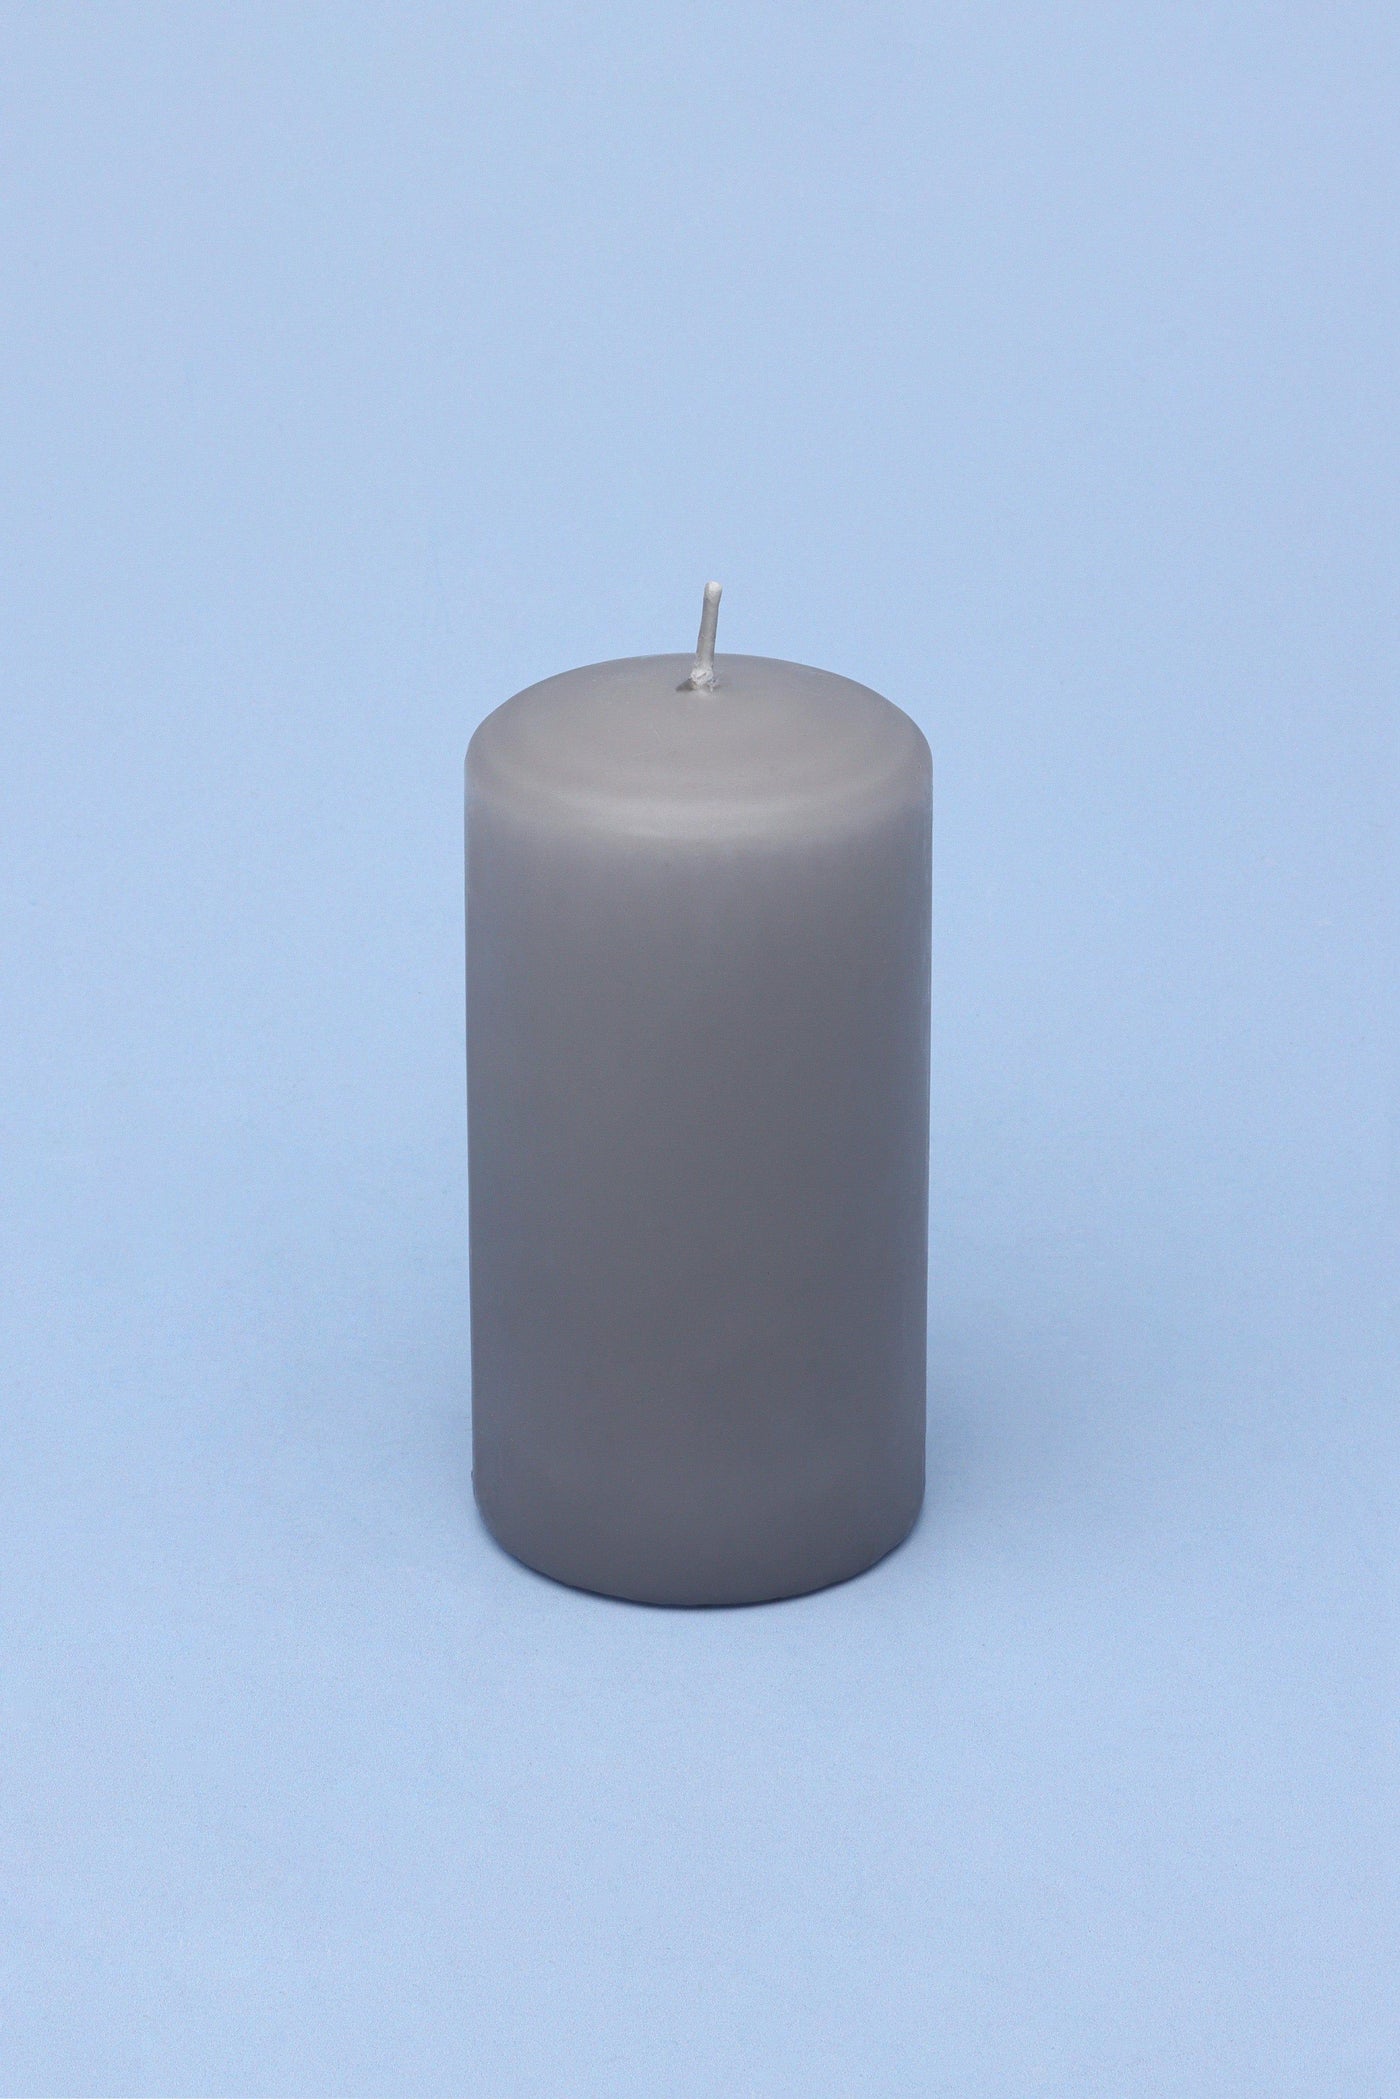 G Decor Candles Grey Classic Unscented White Grey Pillar Candle